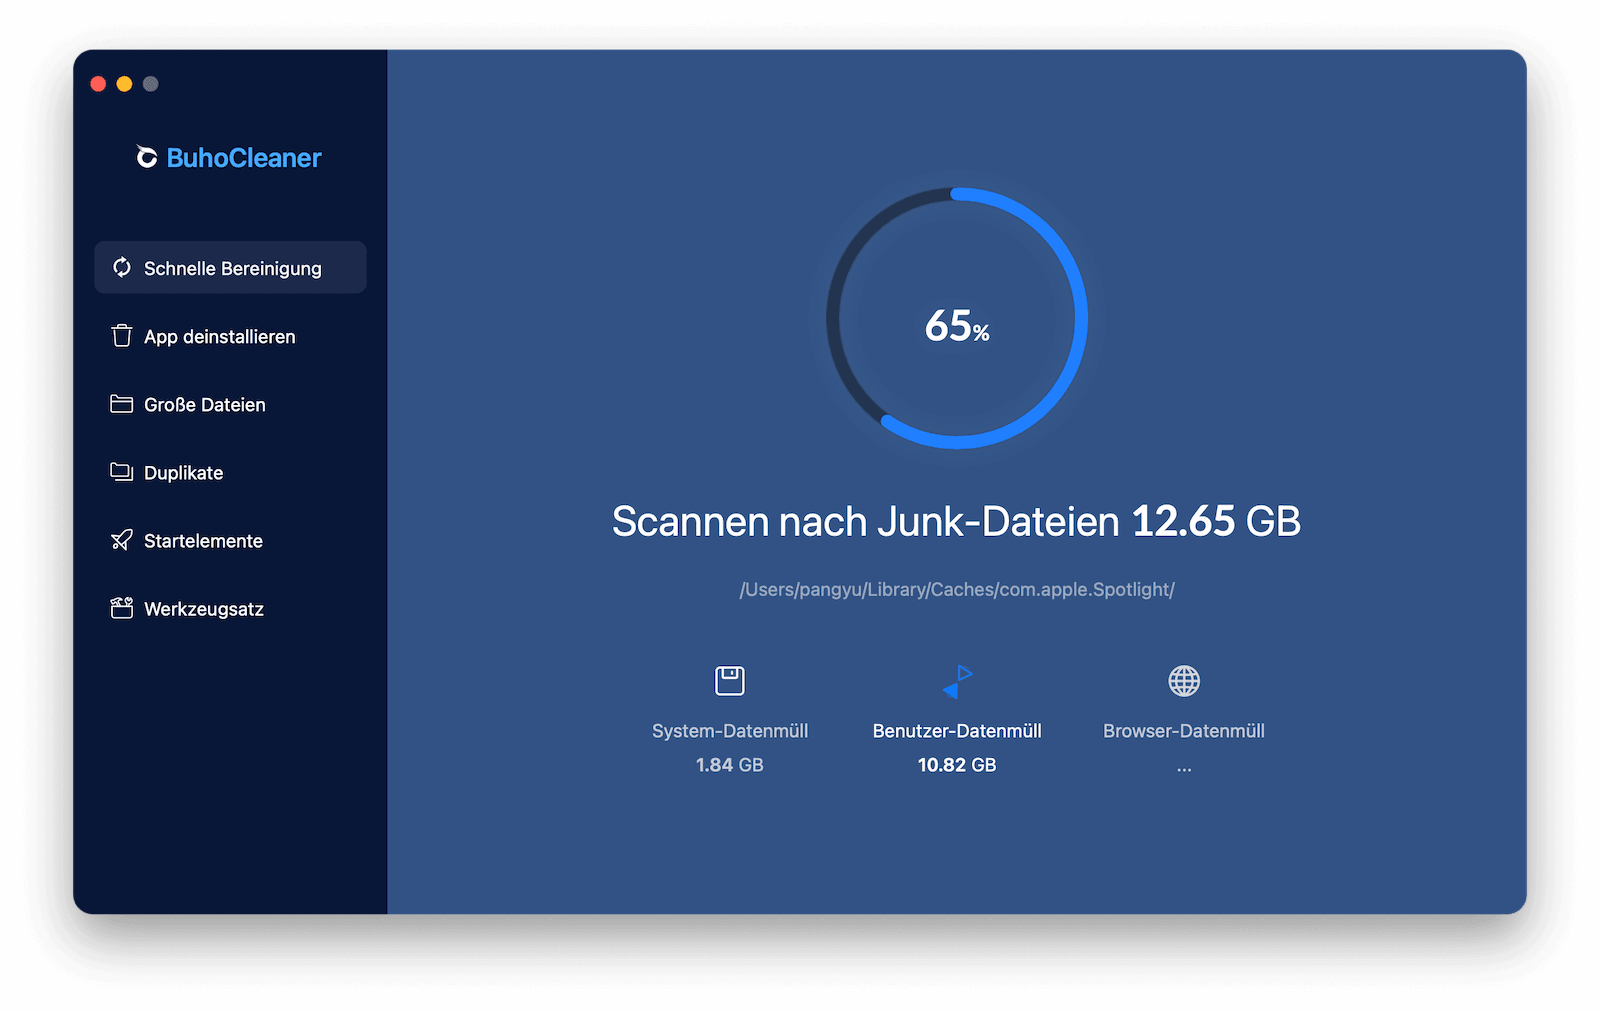 quickly-clear-disk-buhocleaner-de